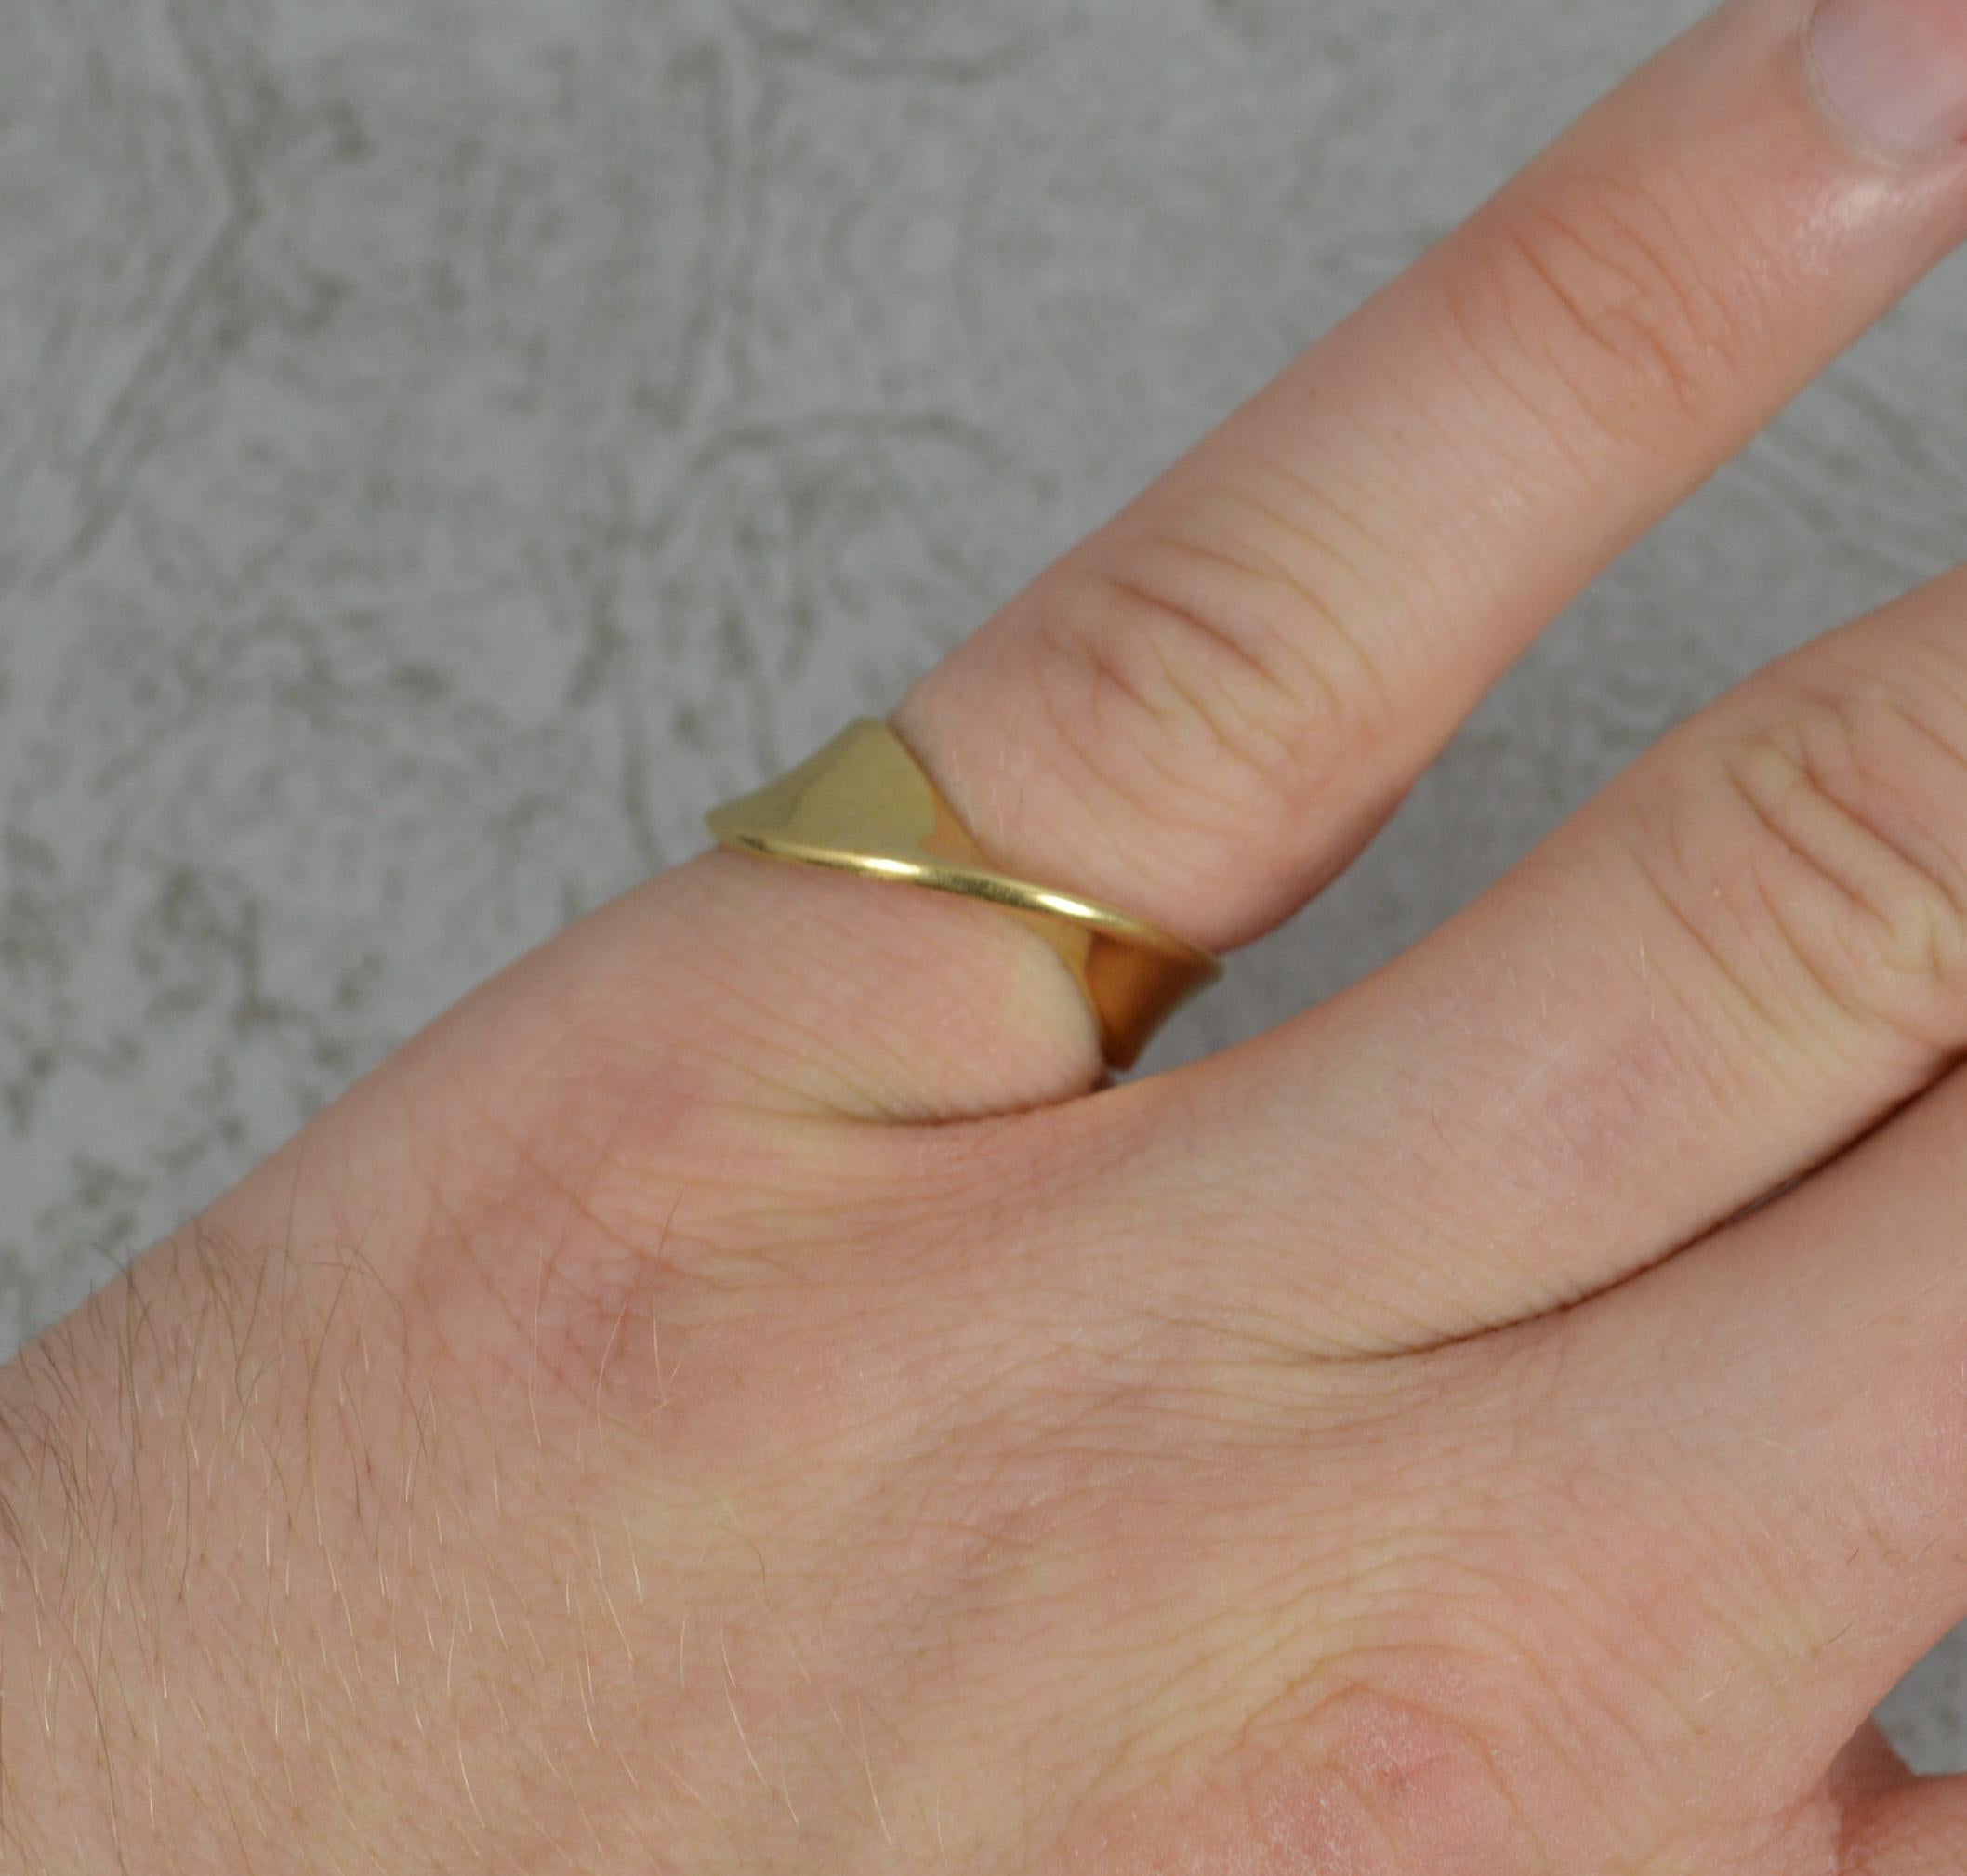 Georg Jensen solid 18 carat yellow gold torun band. Simple and stylish example of twist design. 7.5mm wide band to front. Part of the Torun range, number 900.

CONDITION ; Excellent. Crisp design. Clean. Clear hallmarks. Please view